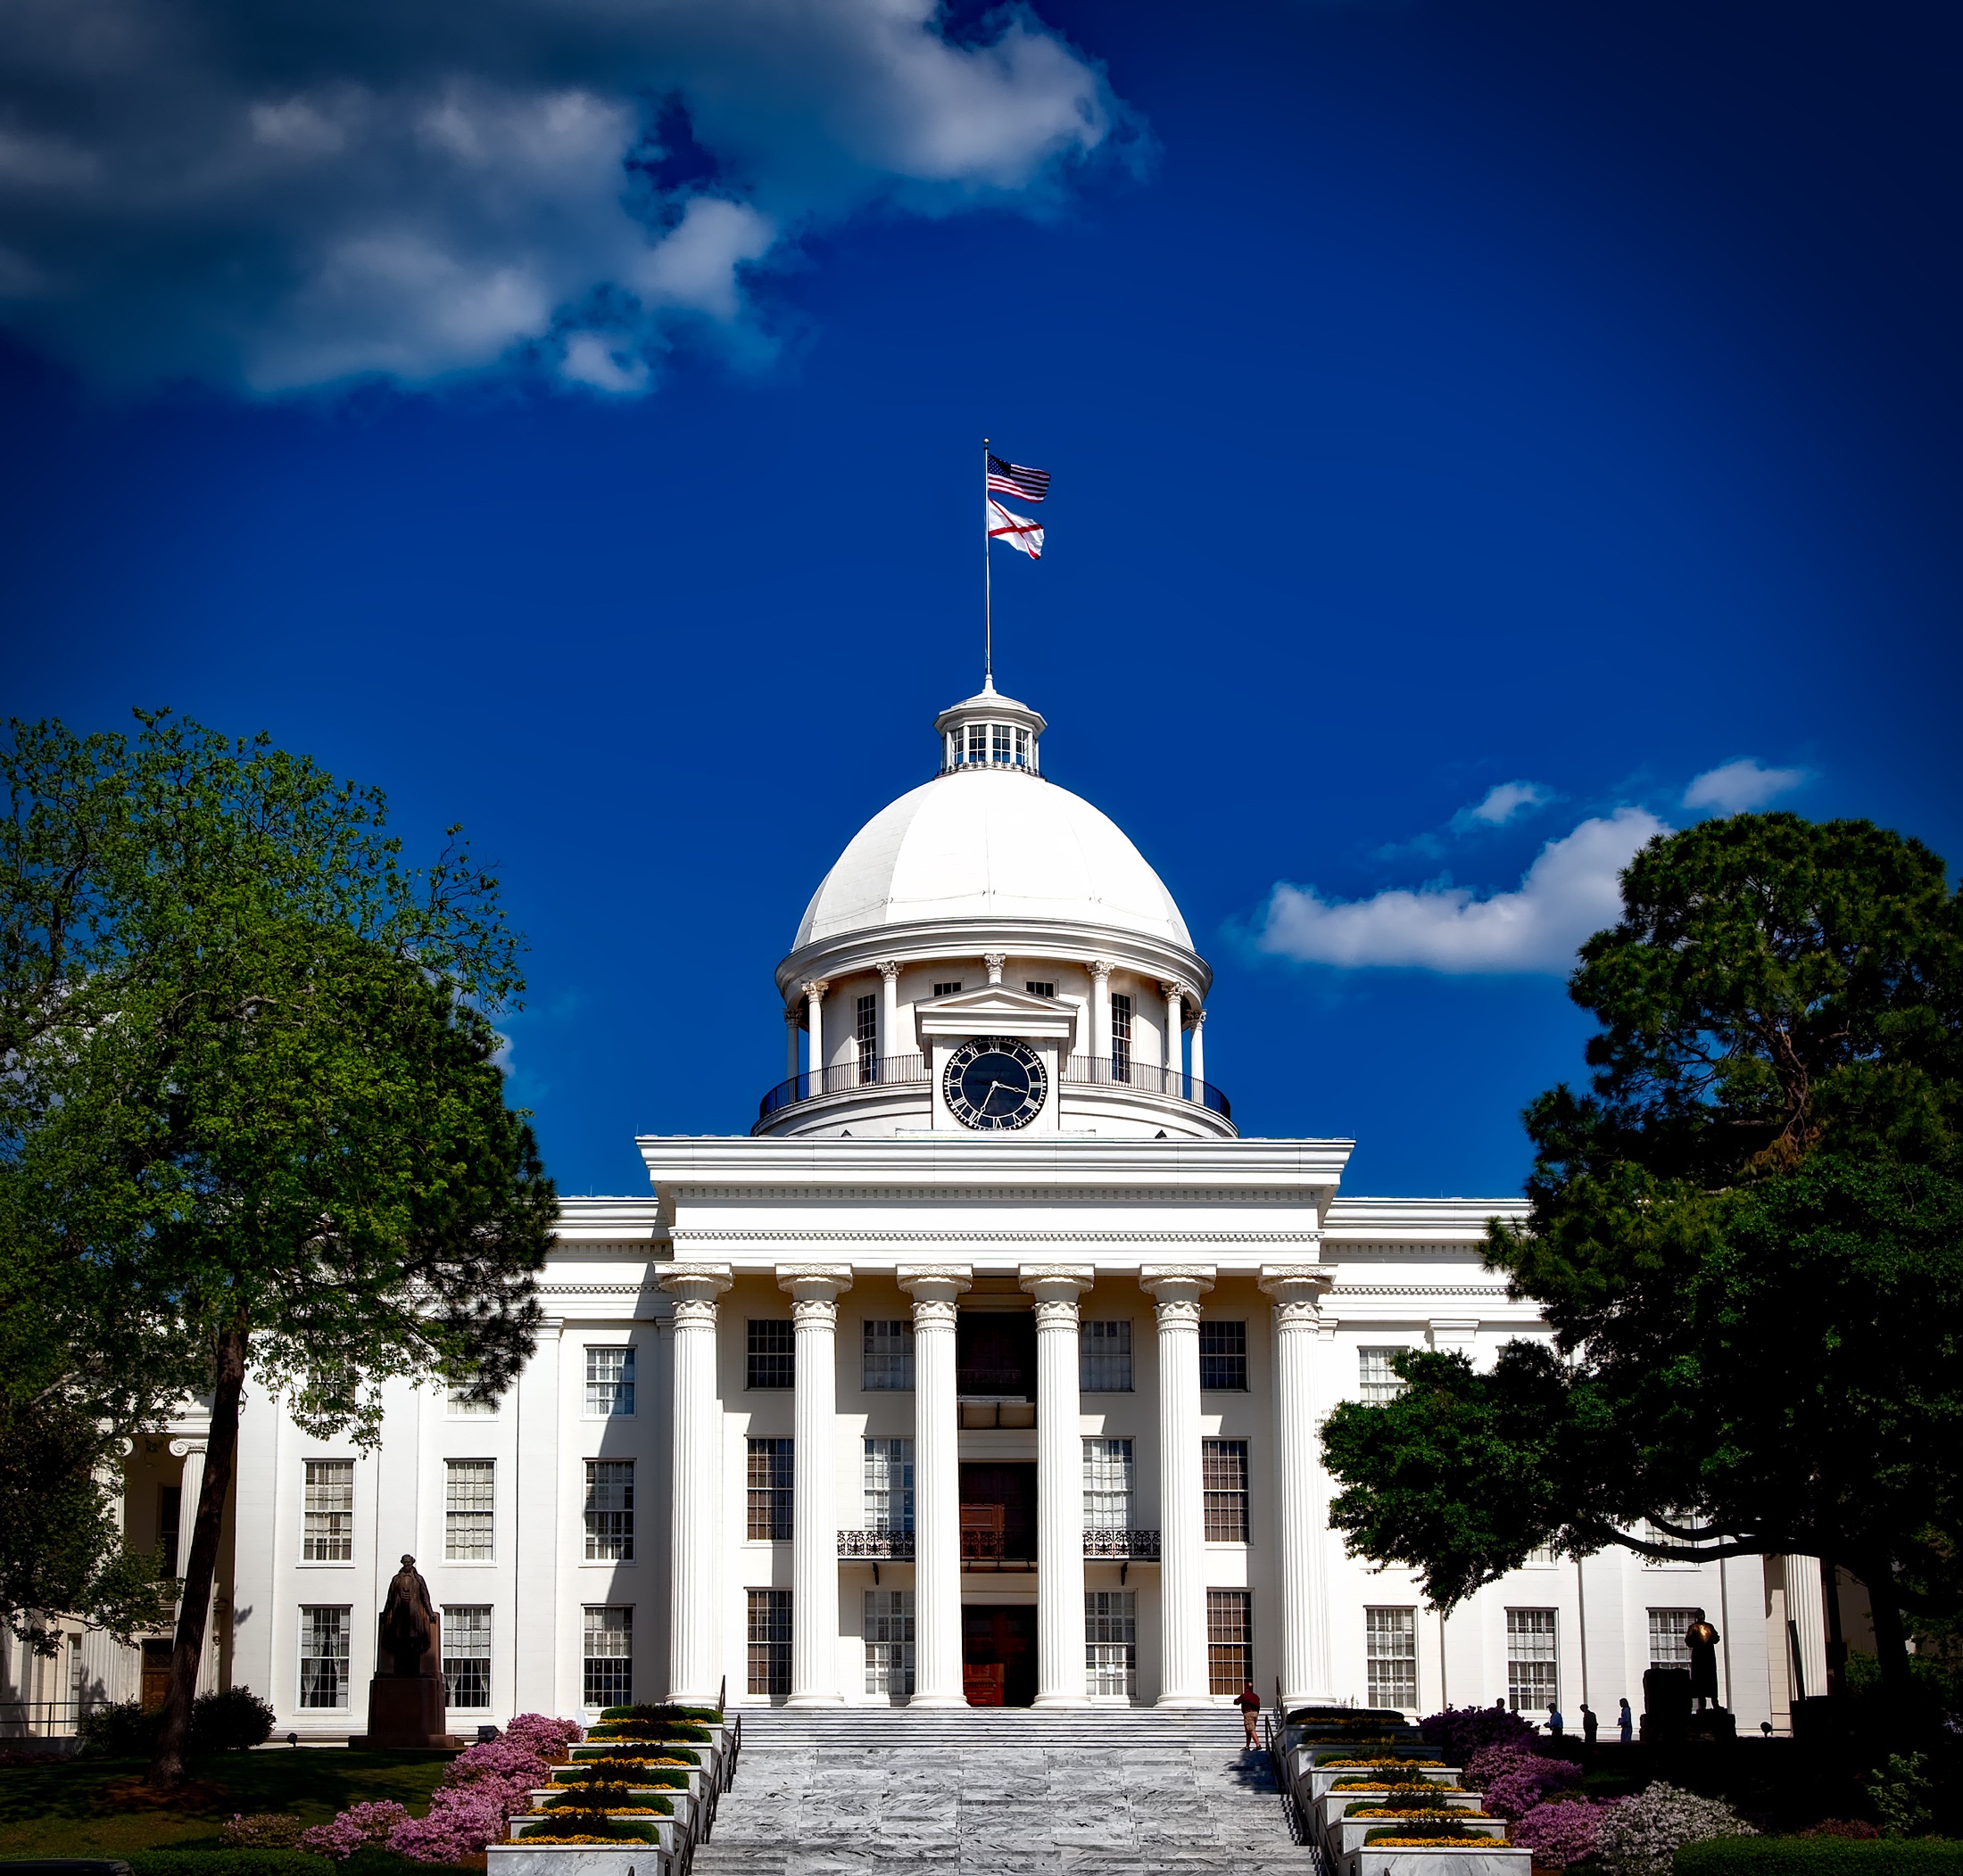 Collection 90+ Images montgomery is the capital of what state Full HD, 2k, 4k